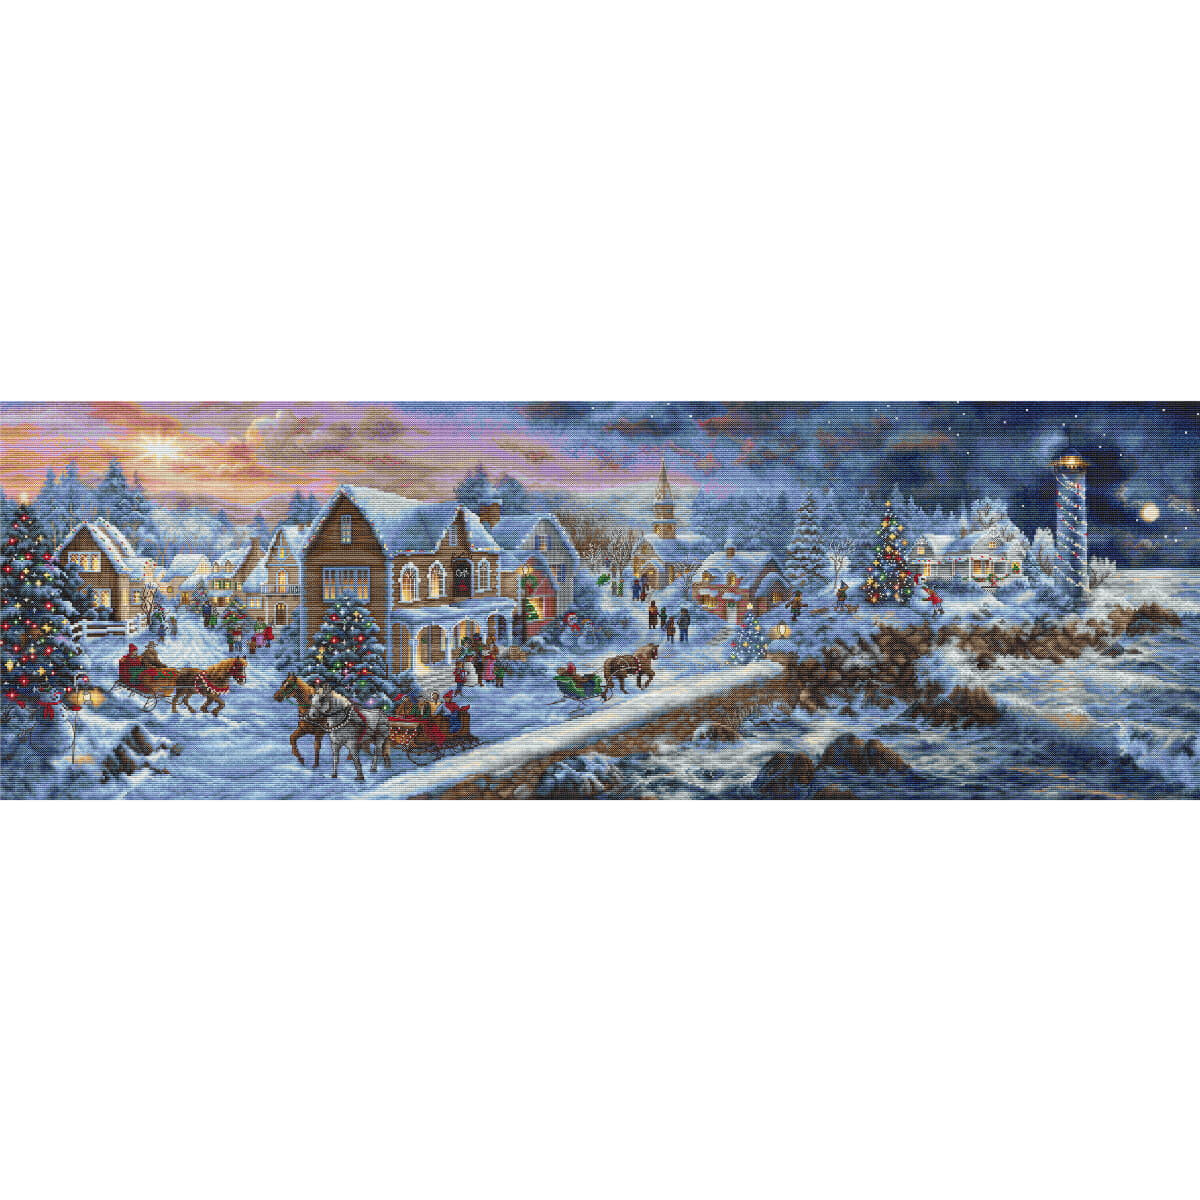 A picturesque snow-covered village scene at dusk,...